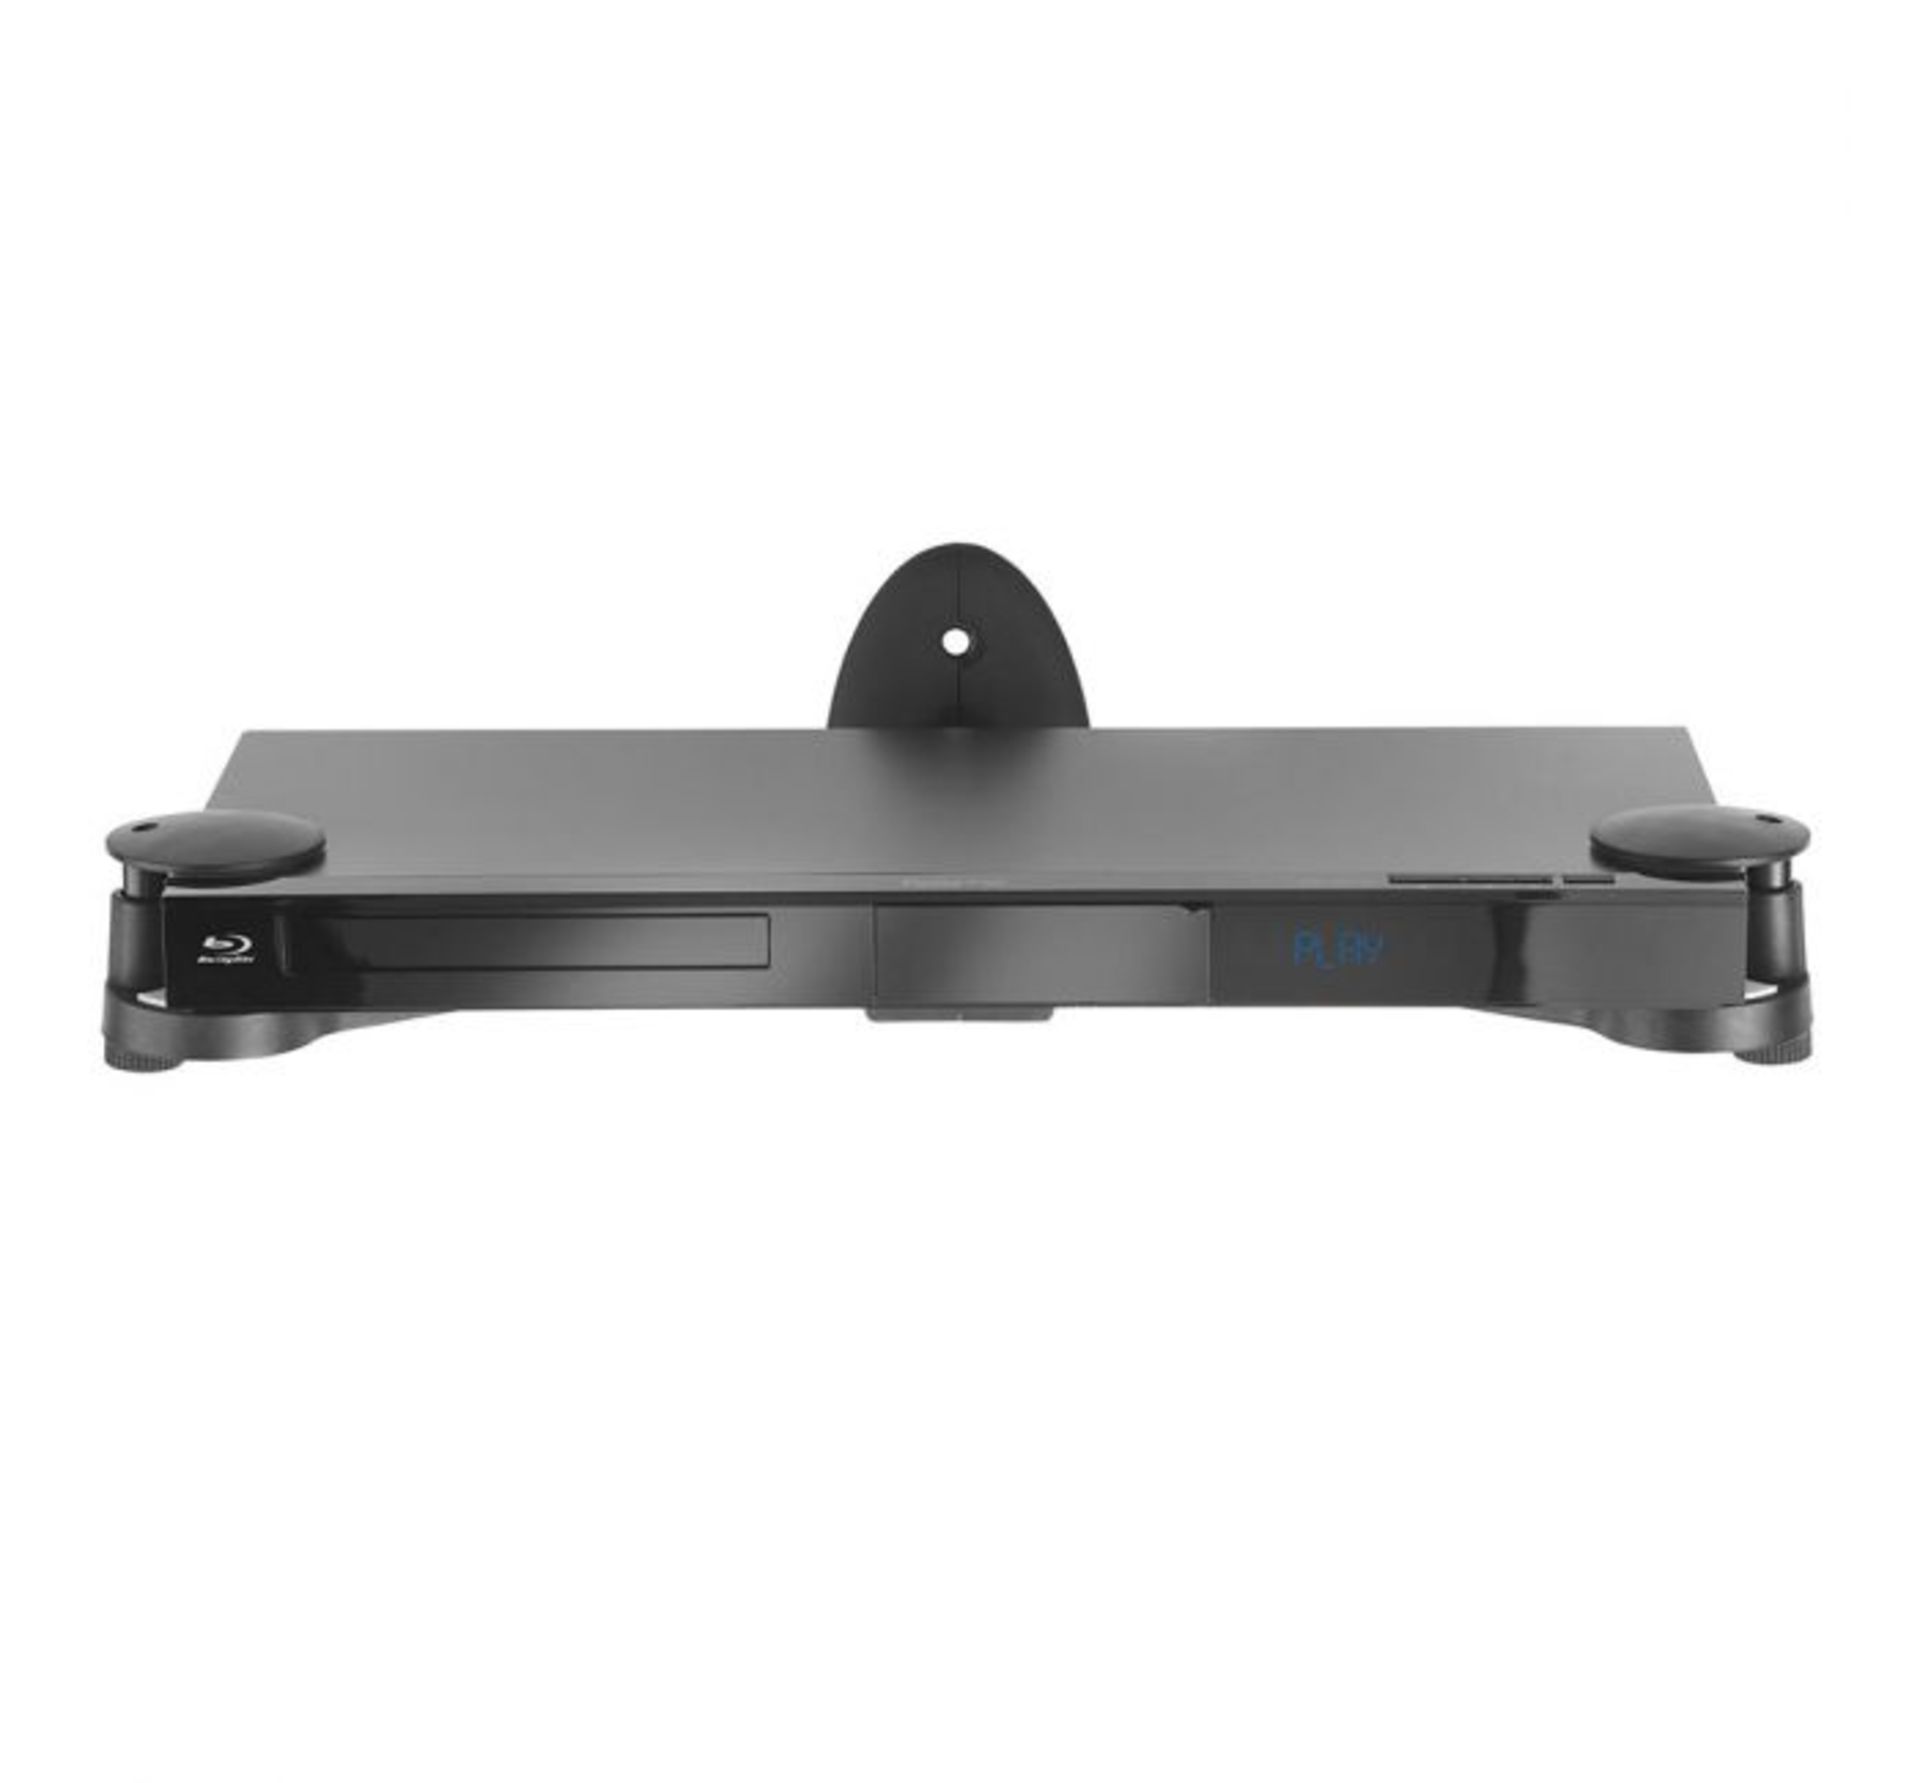 (AP8) Adjustable TV Shelf Bracket Supports and secures your TV accessories and entertainment d...